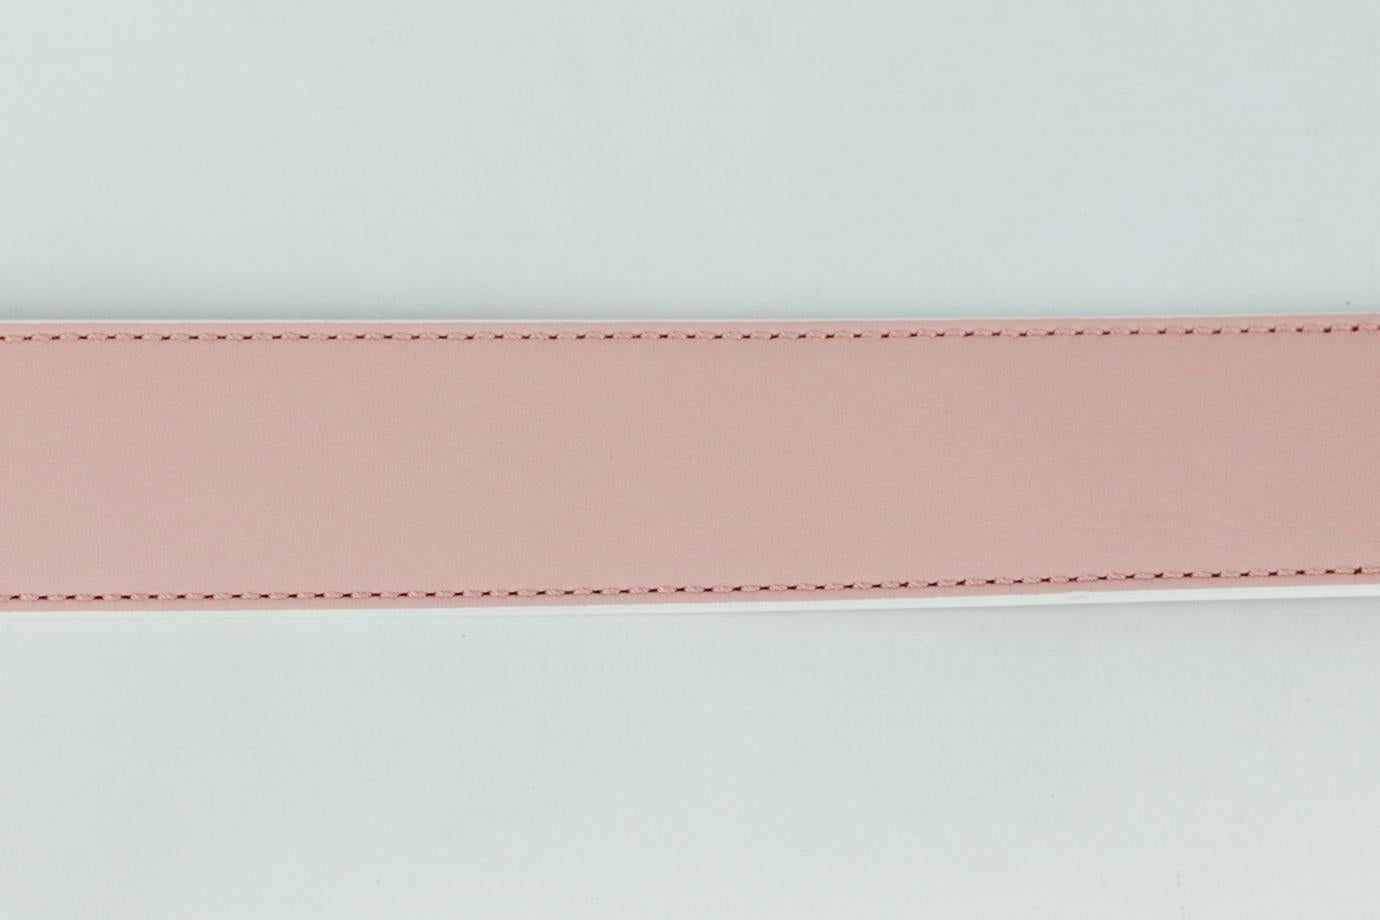 Fendi two tone leather bag strap. Made from pink and red leather with white trim and gold-tone clasps. L: 35 in. W: 1.5 in